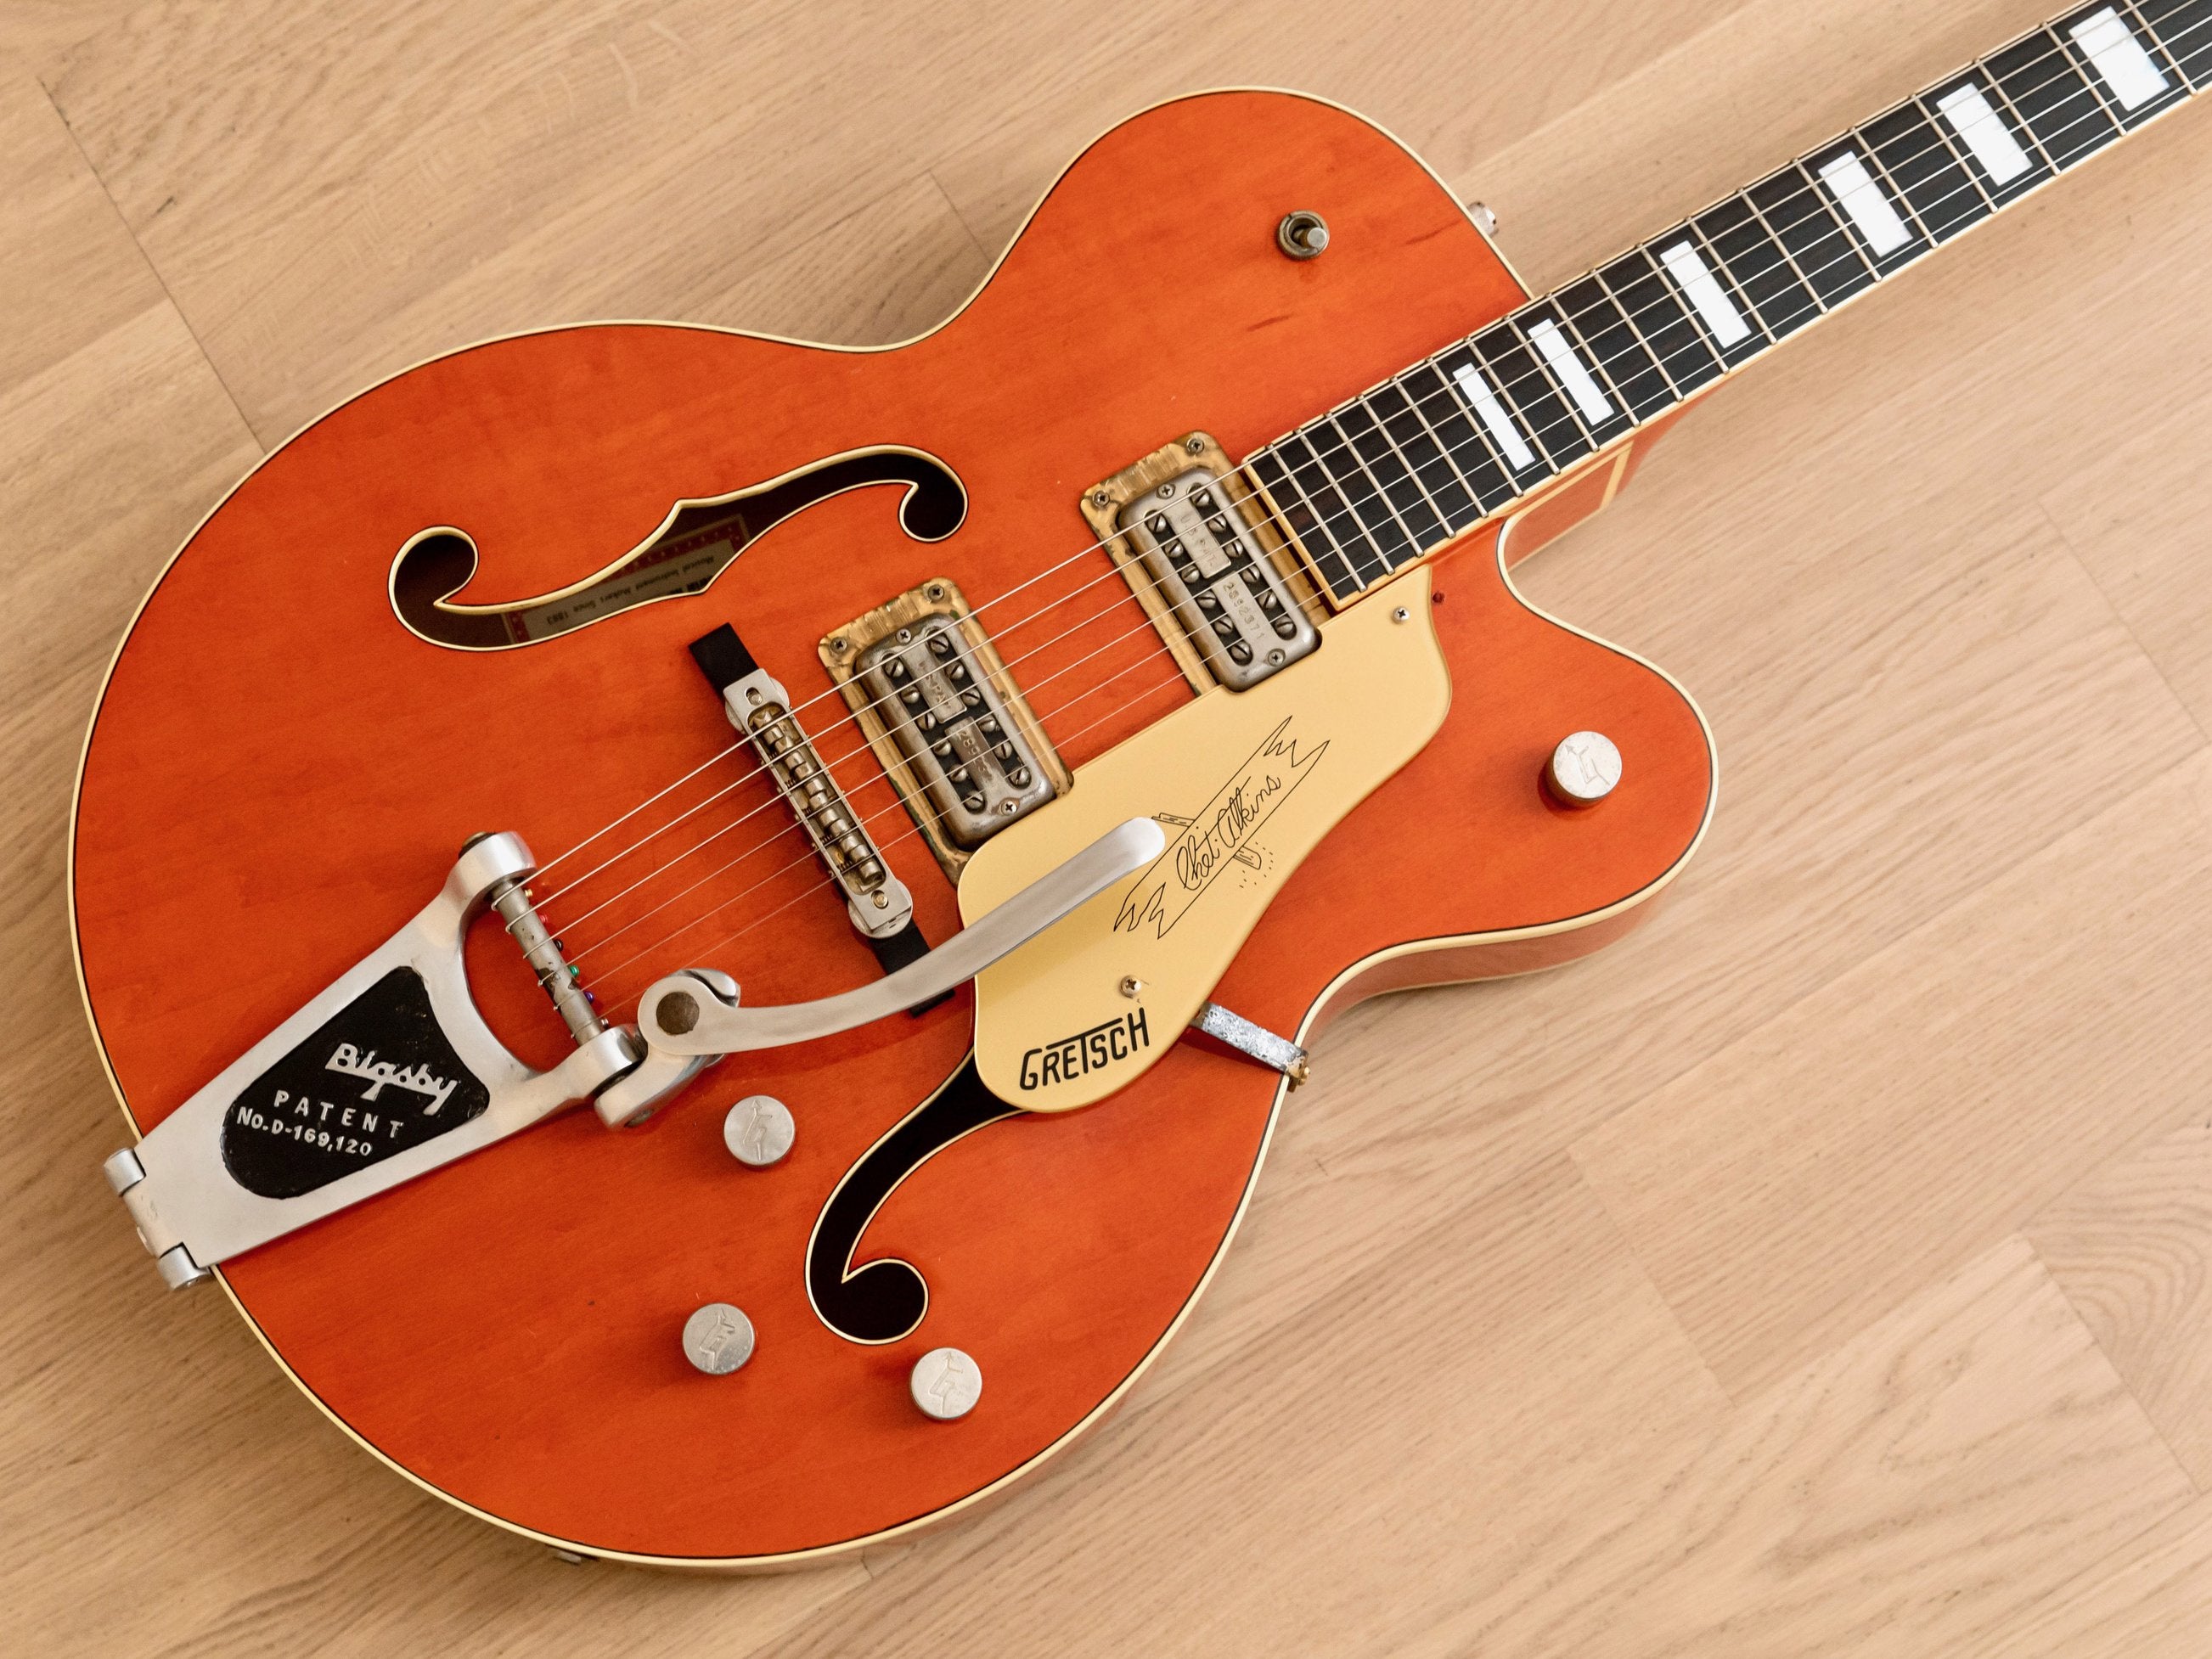 1989 Gretsch 6120 Chet Atkins Electric Guitar Western Orange w/ Bigsby, FilterTrons, Case